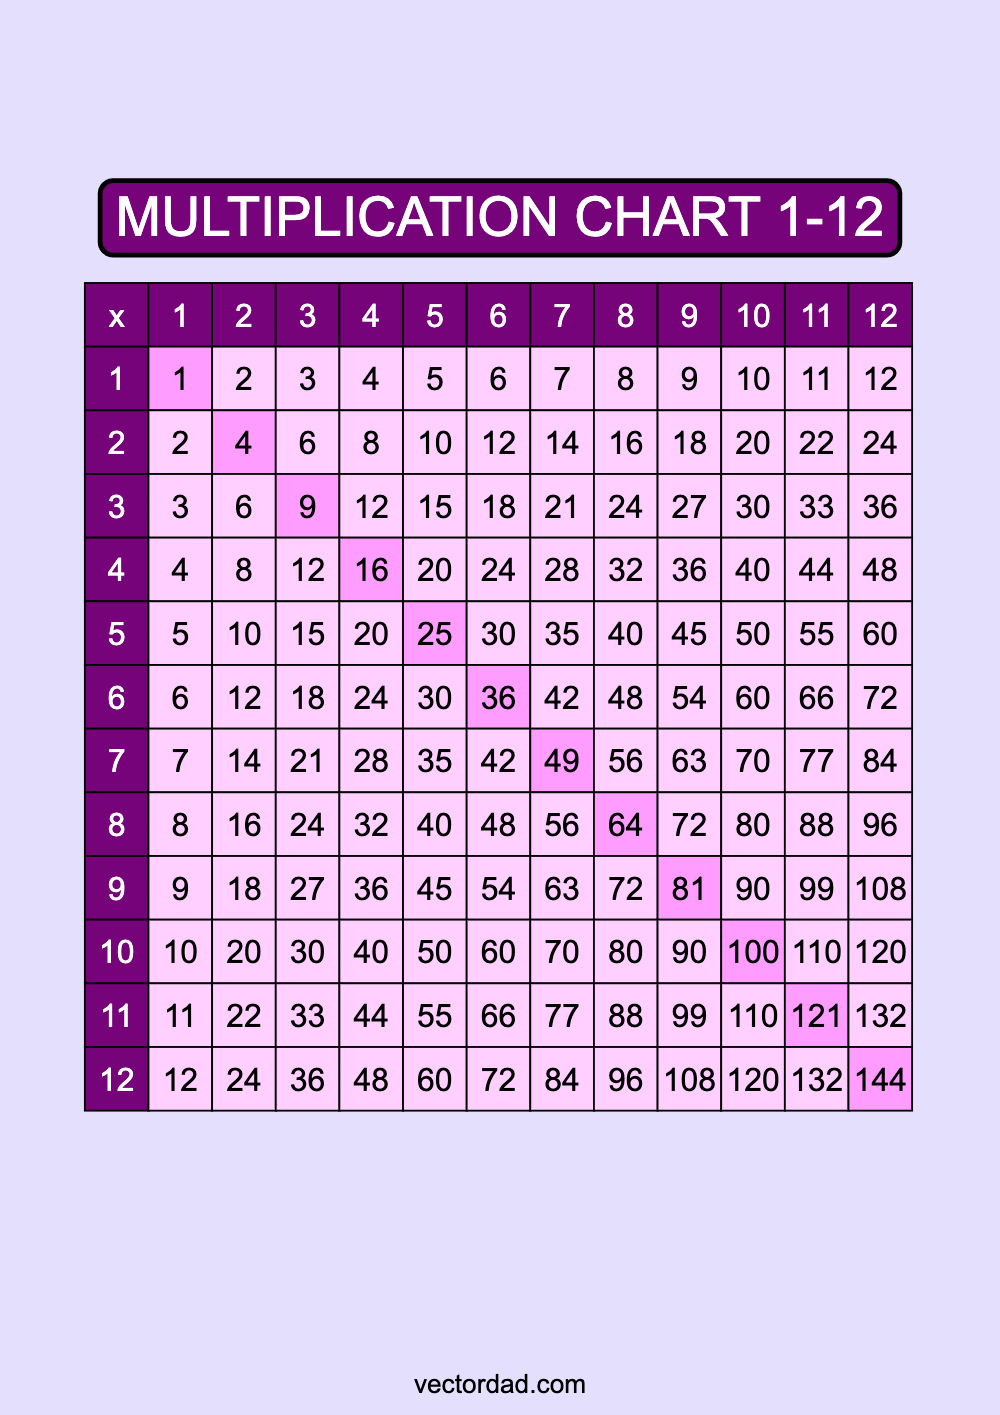 Purple Multiplication Chart Printable 1 to 12 portrait Free,multiplication chart 1-12, multiplication table pdf, multiplication chart printable, 12x12 multiplication chart, prefilled, high quality, sheet, pdf, blank, empty, 3rd grade, 4th grade, 5th grade, template, print, download, online